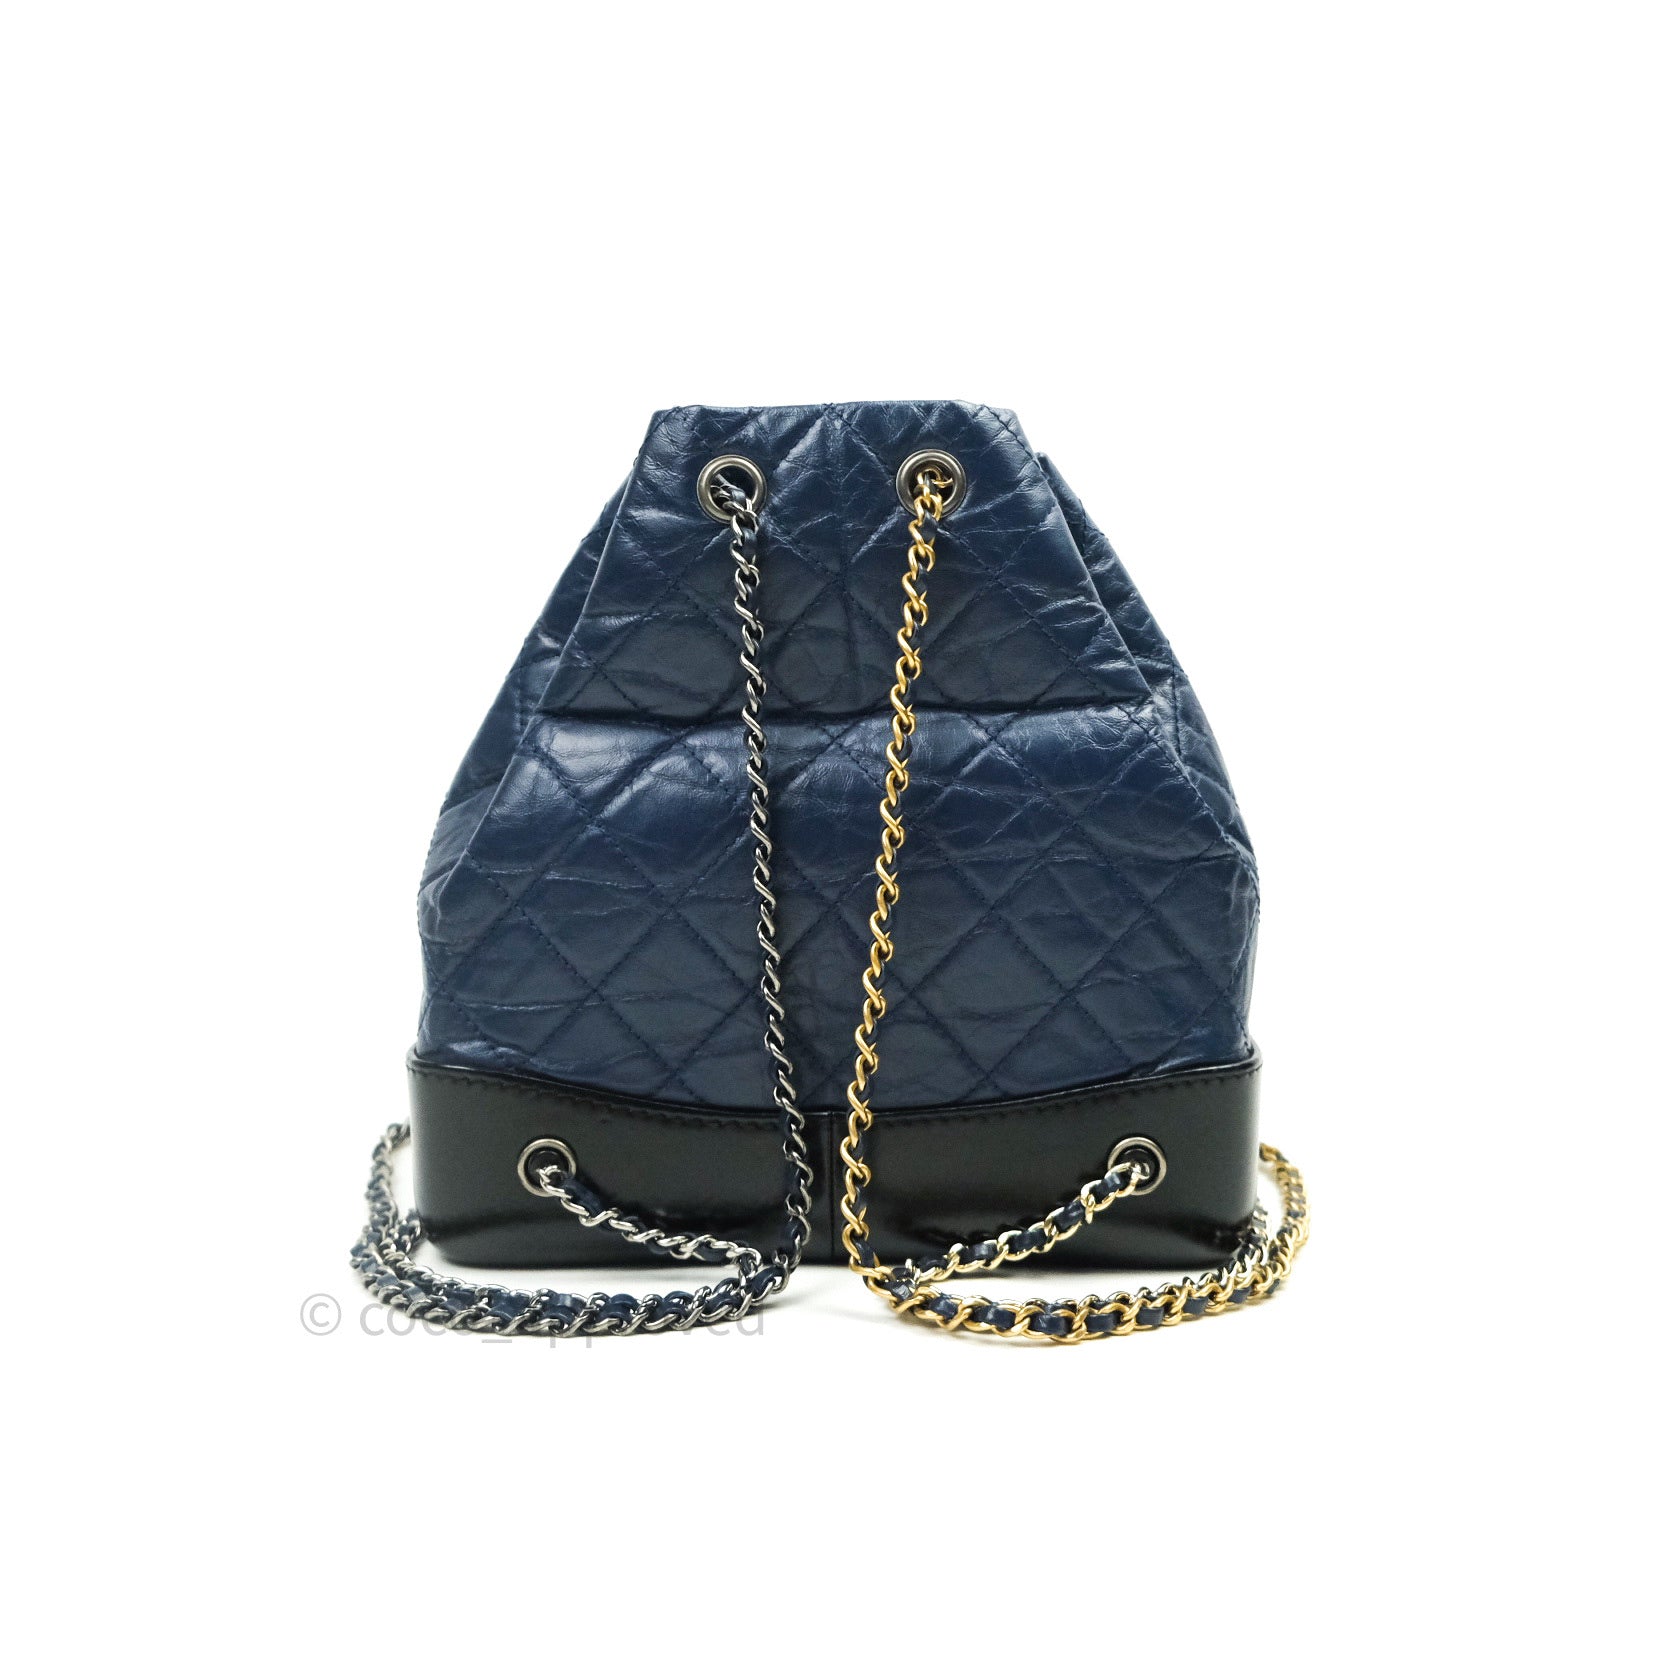 CHANEL Aged Calfskin Quilted Gabrielle Backpack Navy Black 1249026